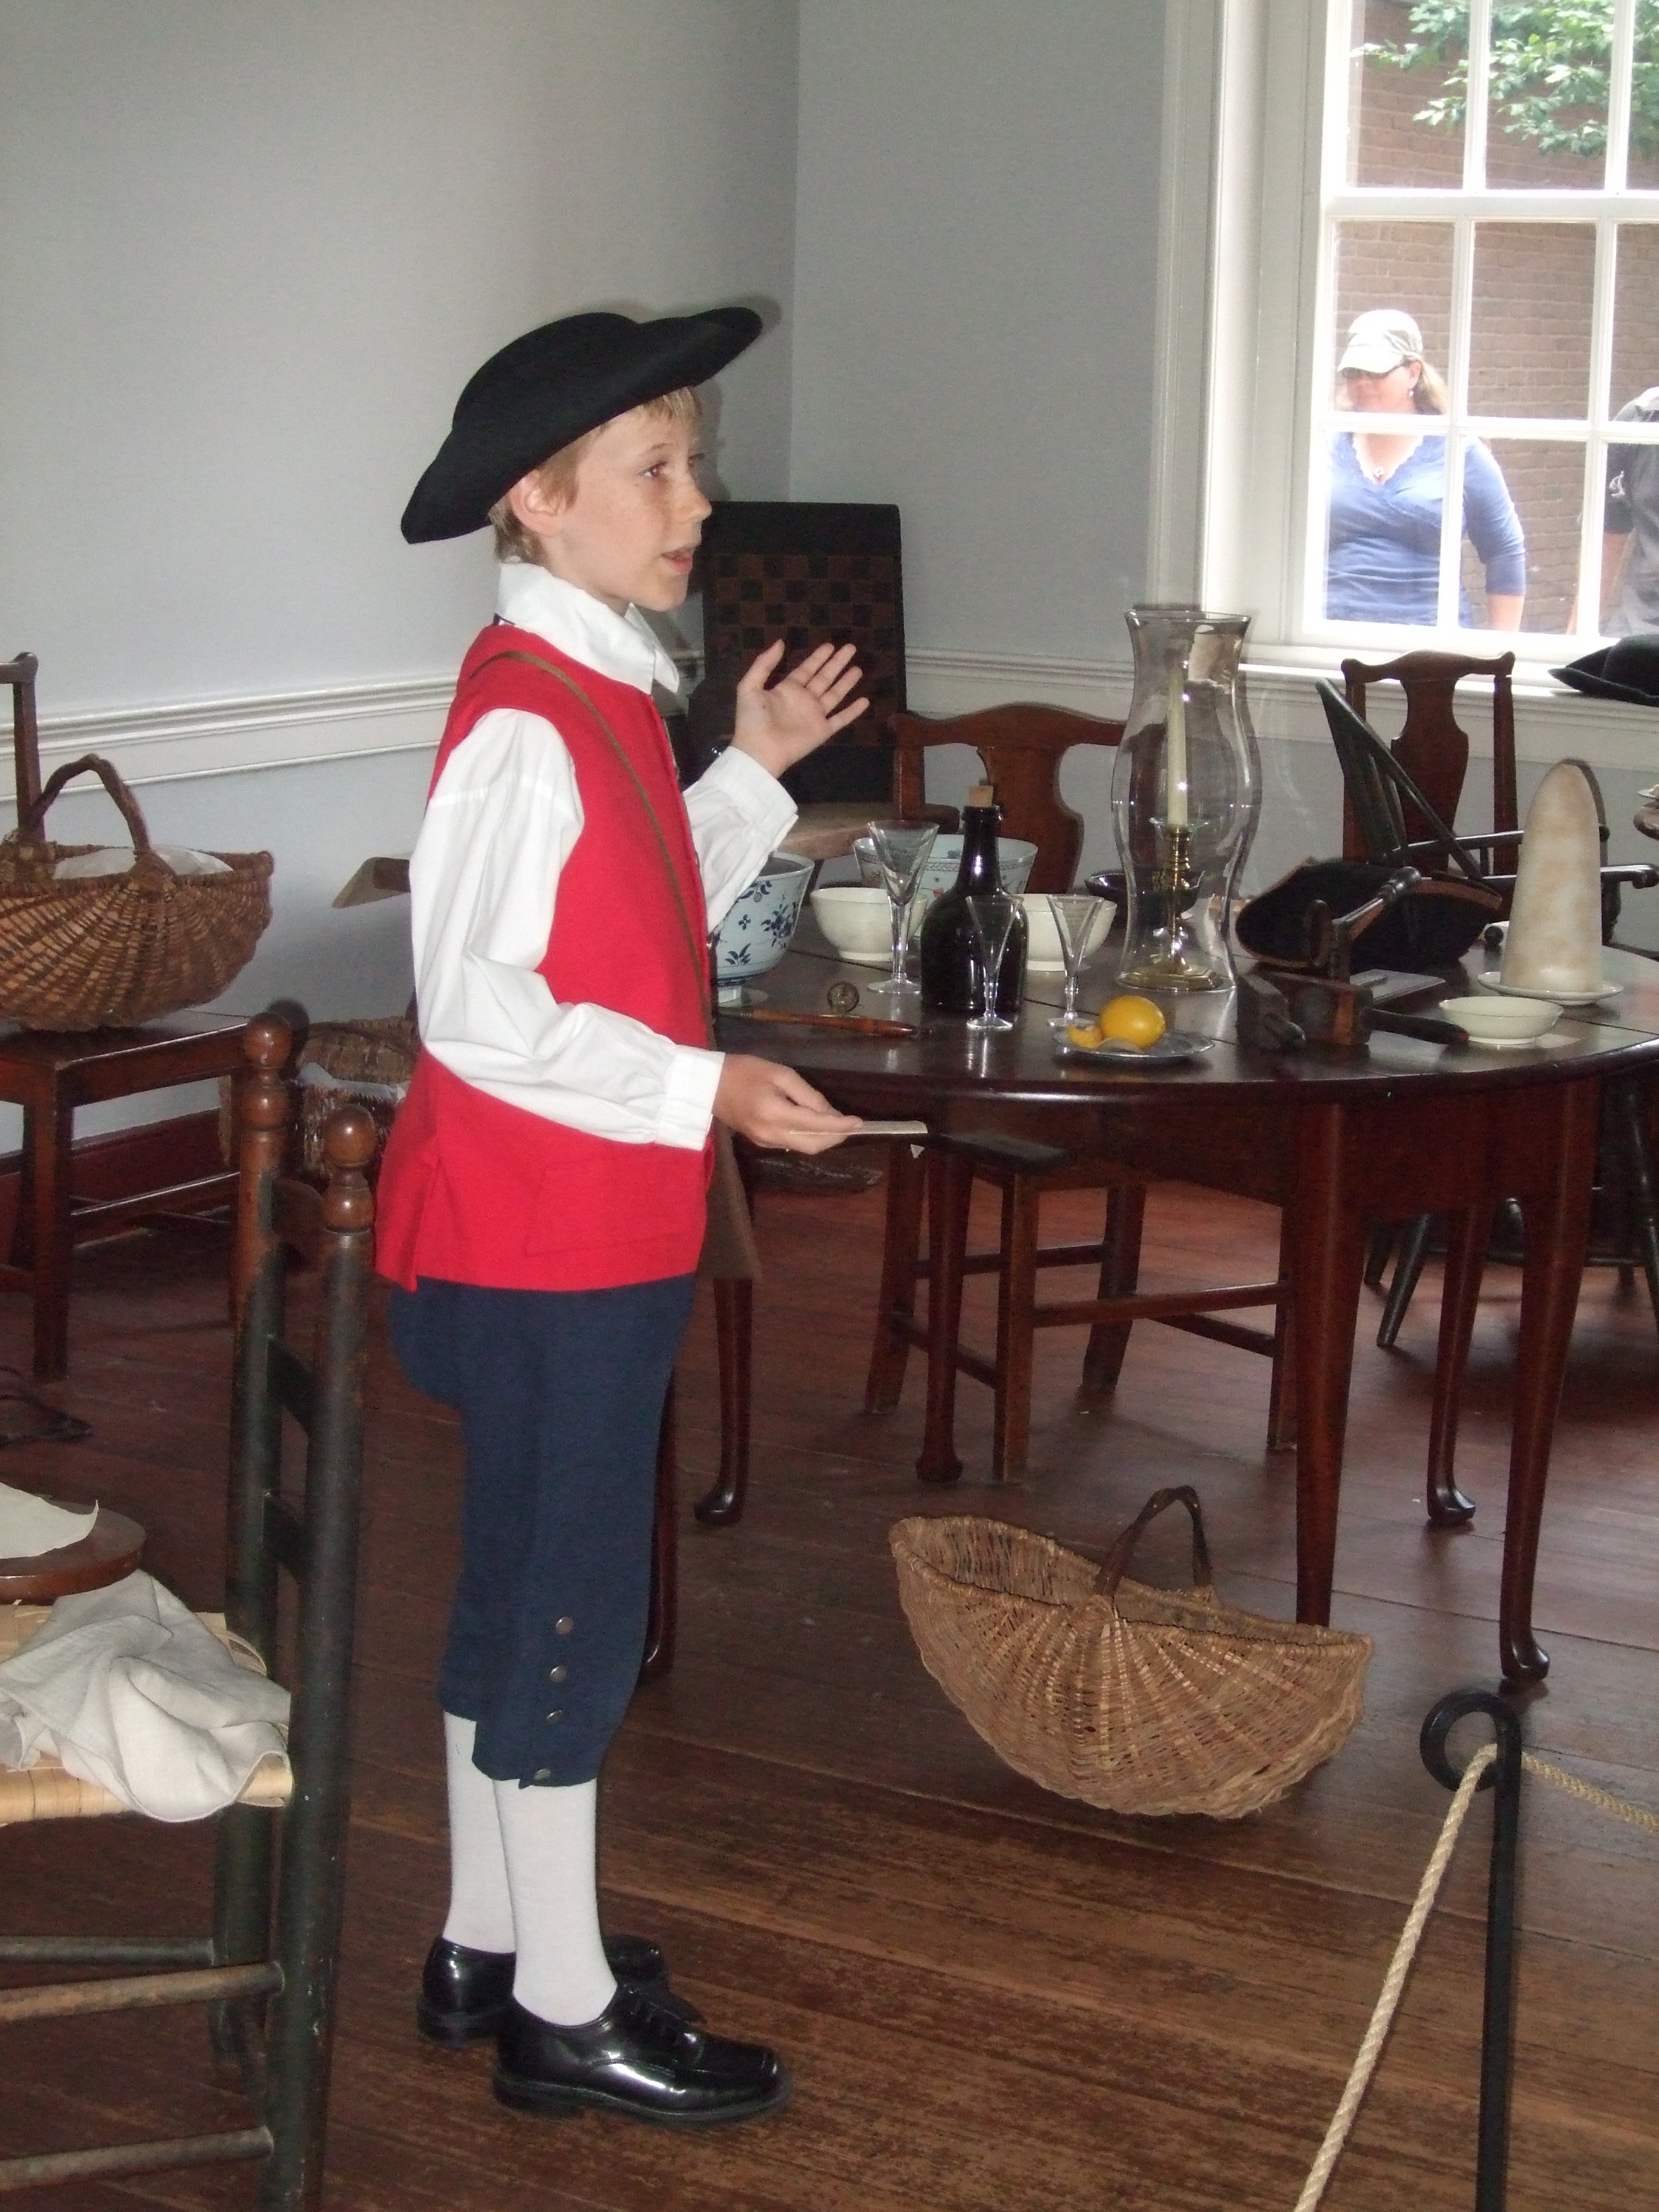 Junior Docent Andrew in historic outfit at Gadsby's Tavern Museum